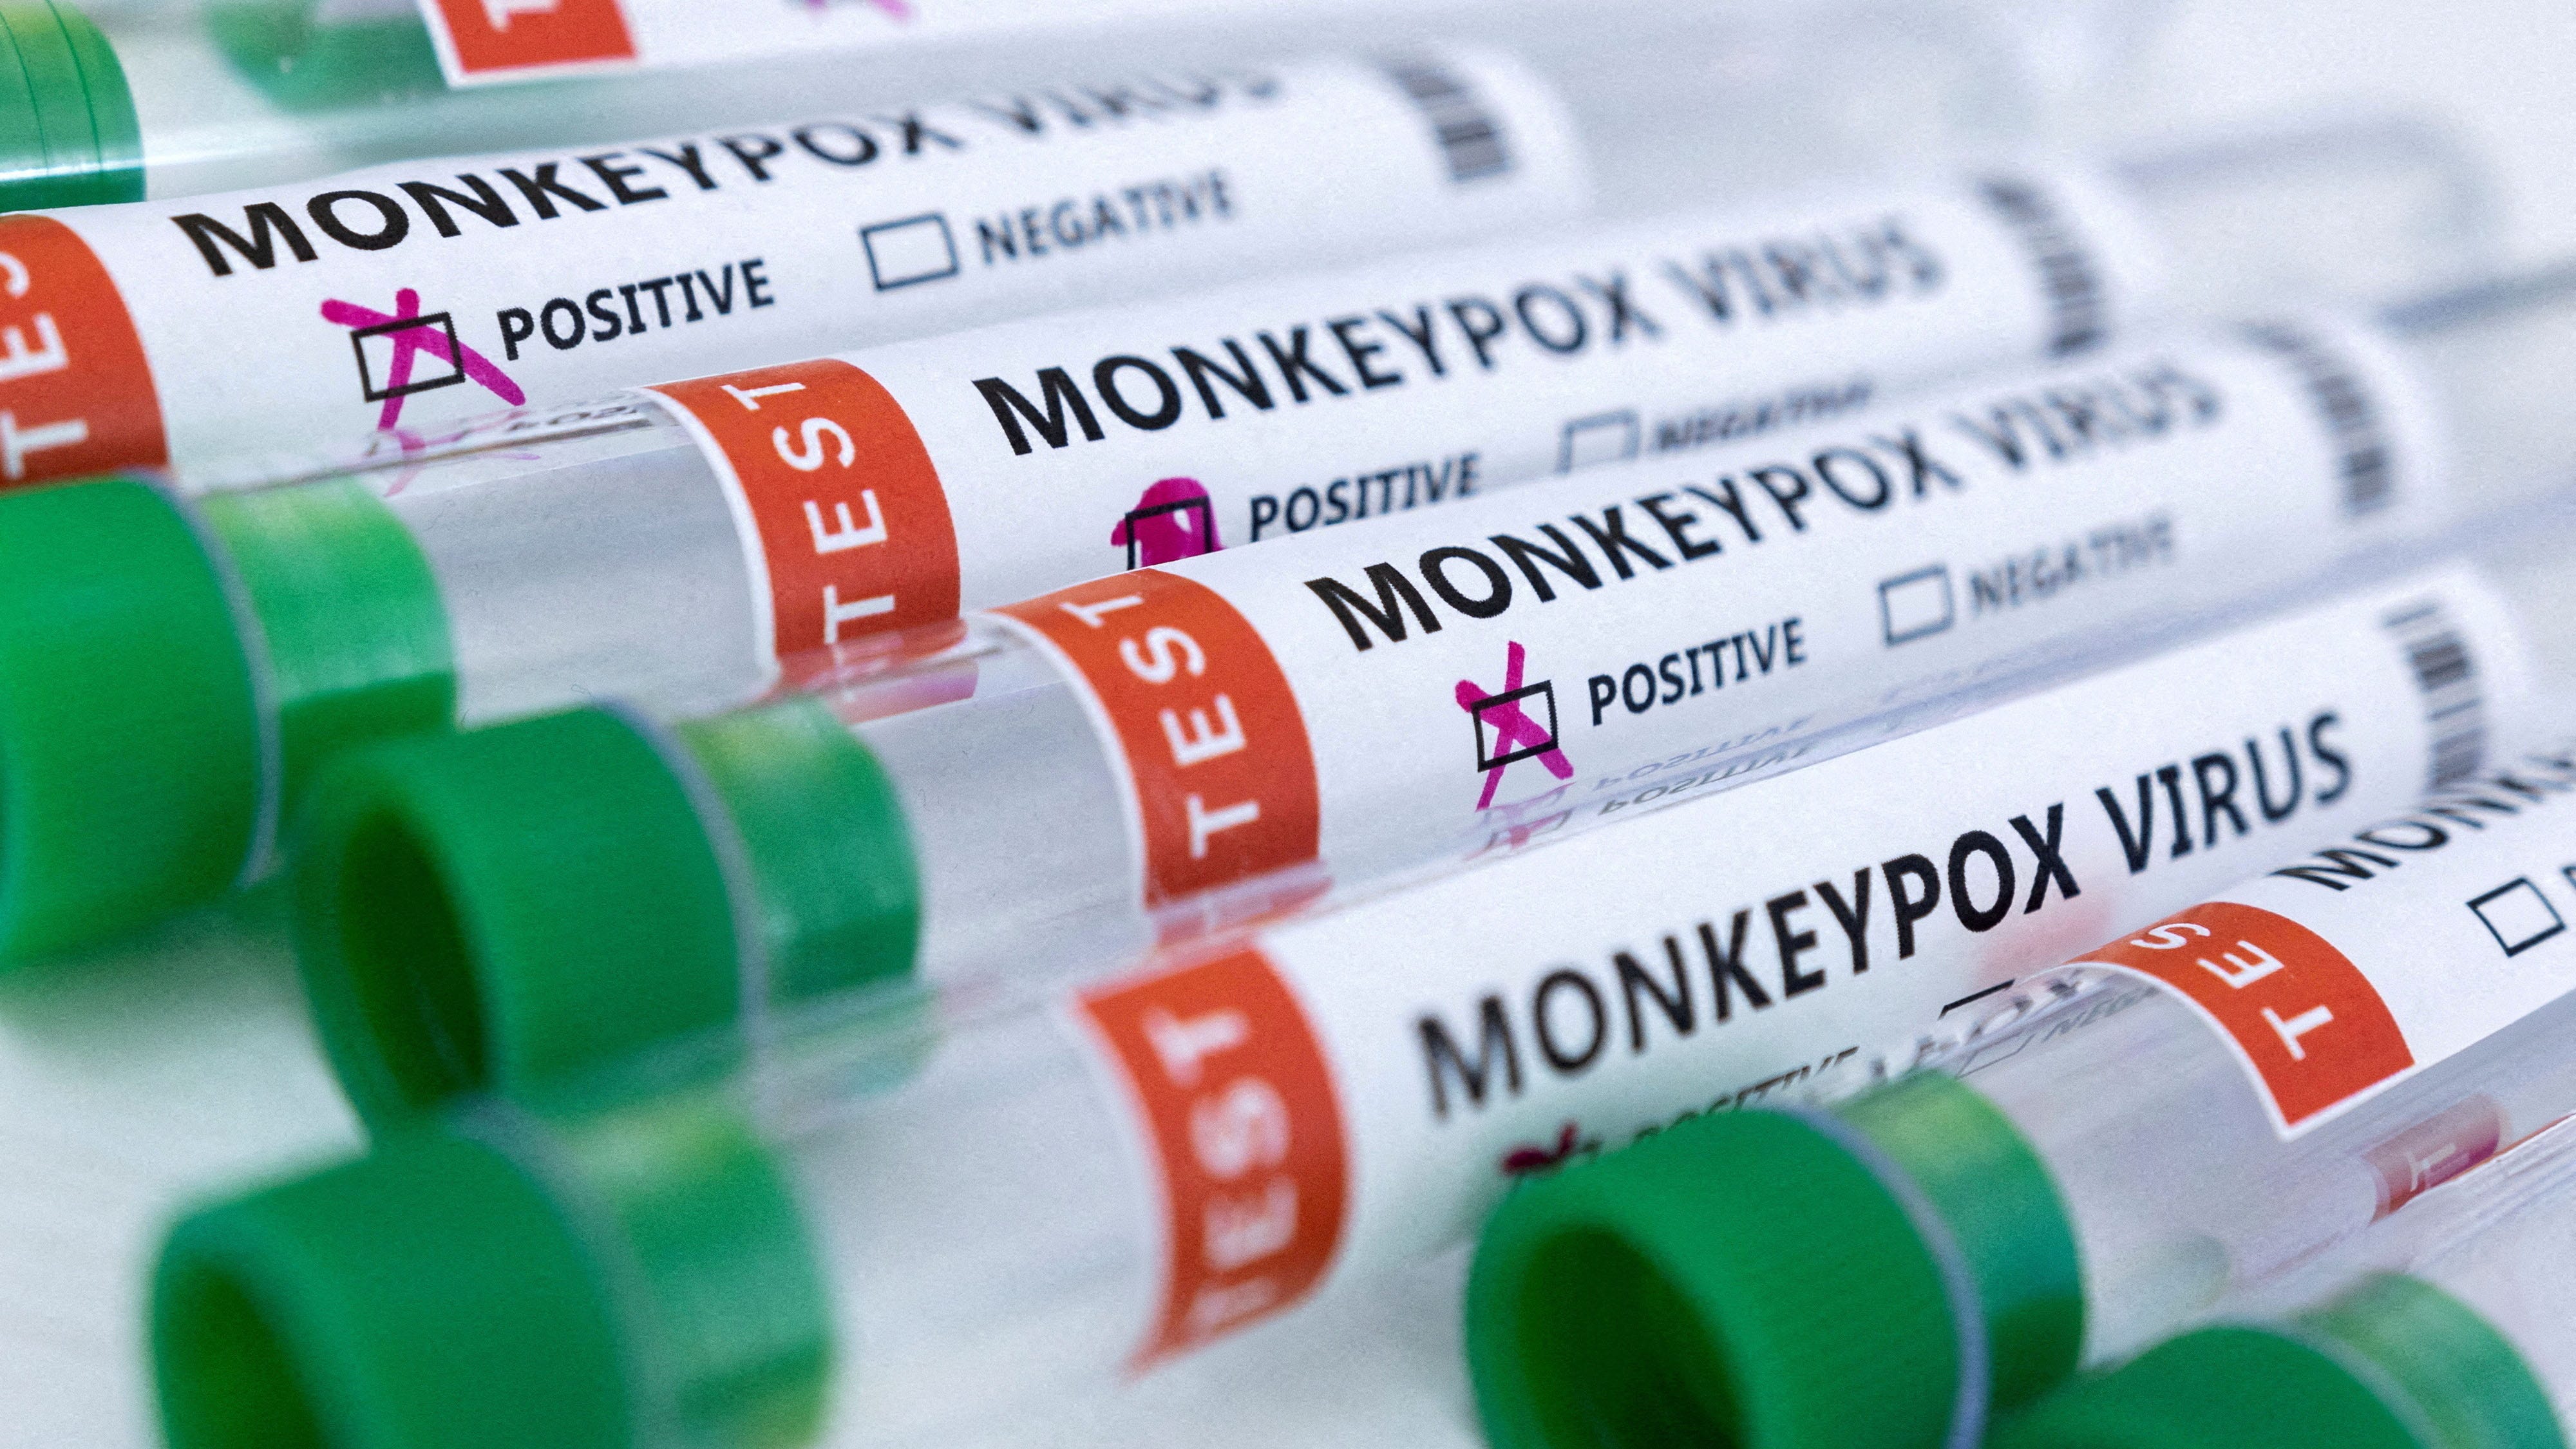 French health body indicates at-risk groups to be vaccinated against monkeypox